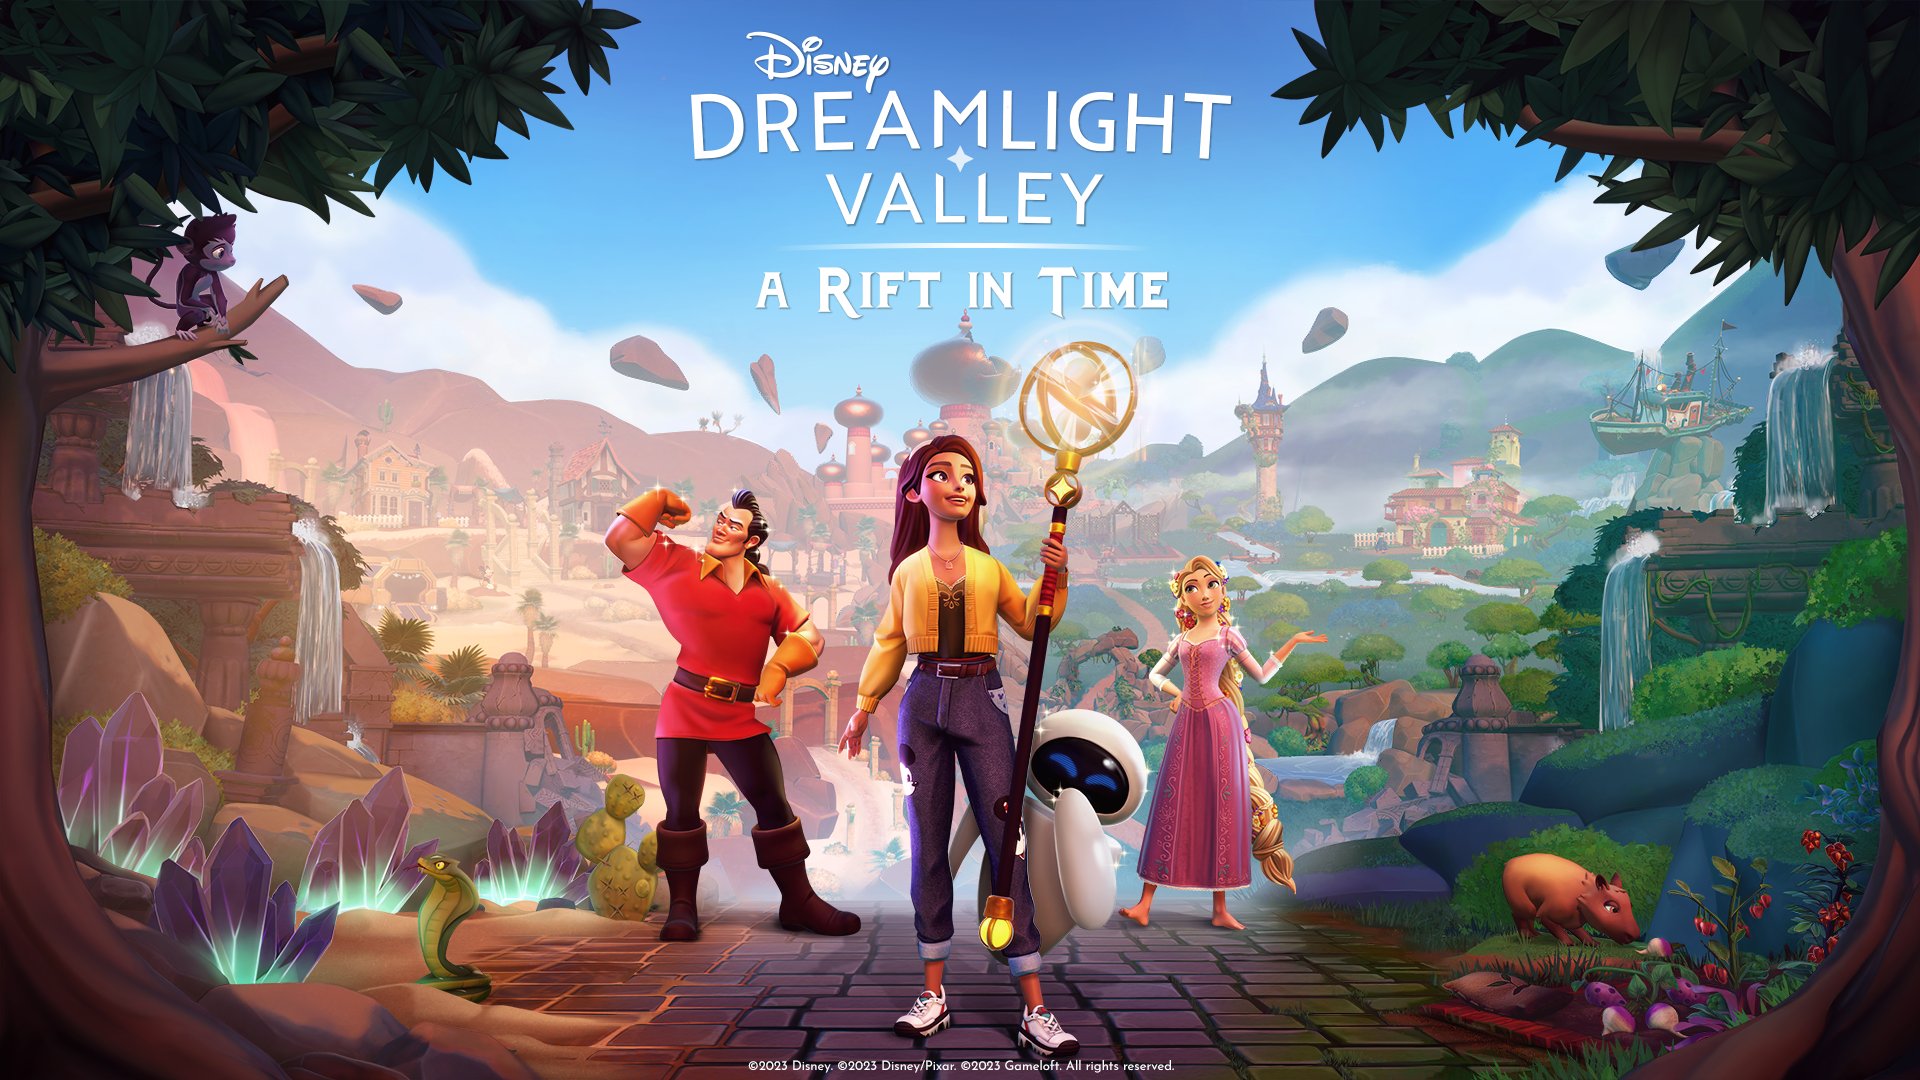 The key art for A Rift in Time, DLC for Disney Dreamlight Valley. At the centre stands a woman with long brown hair and a yellow jacket holding s sceptar. Gaston is to the left, Rupunzel is to the right, and Wall-E is peeking out from behind the woman in yellow.